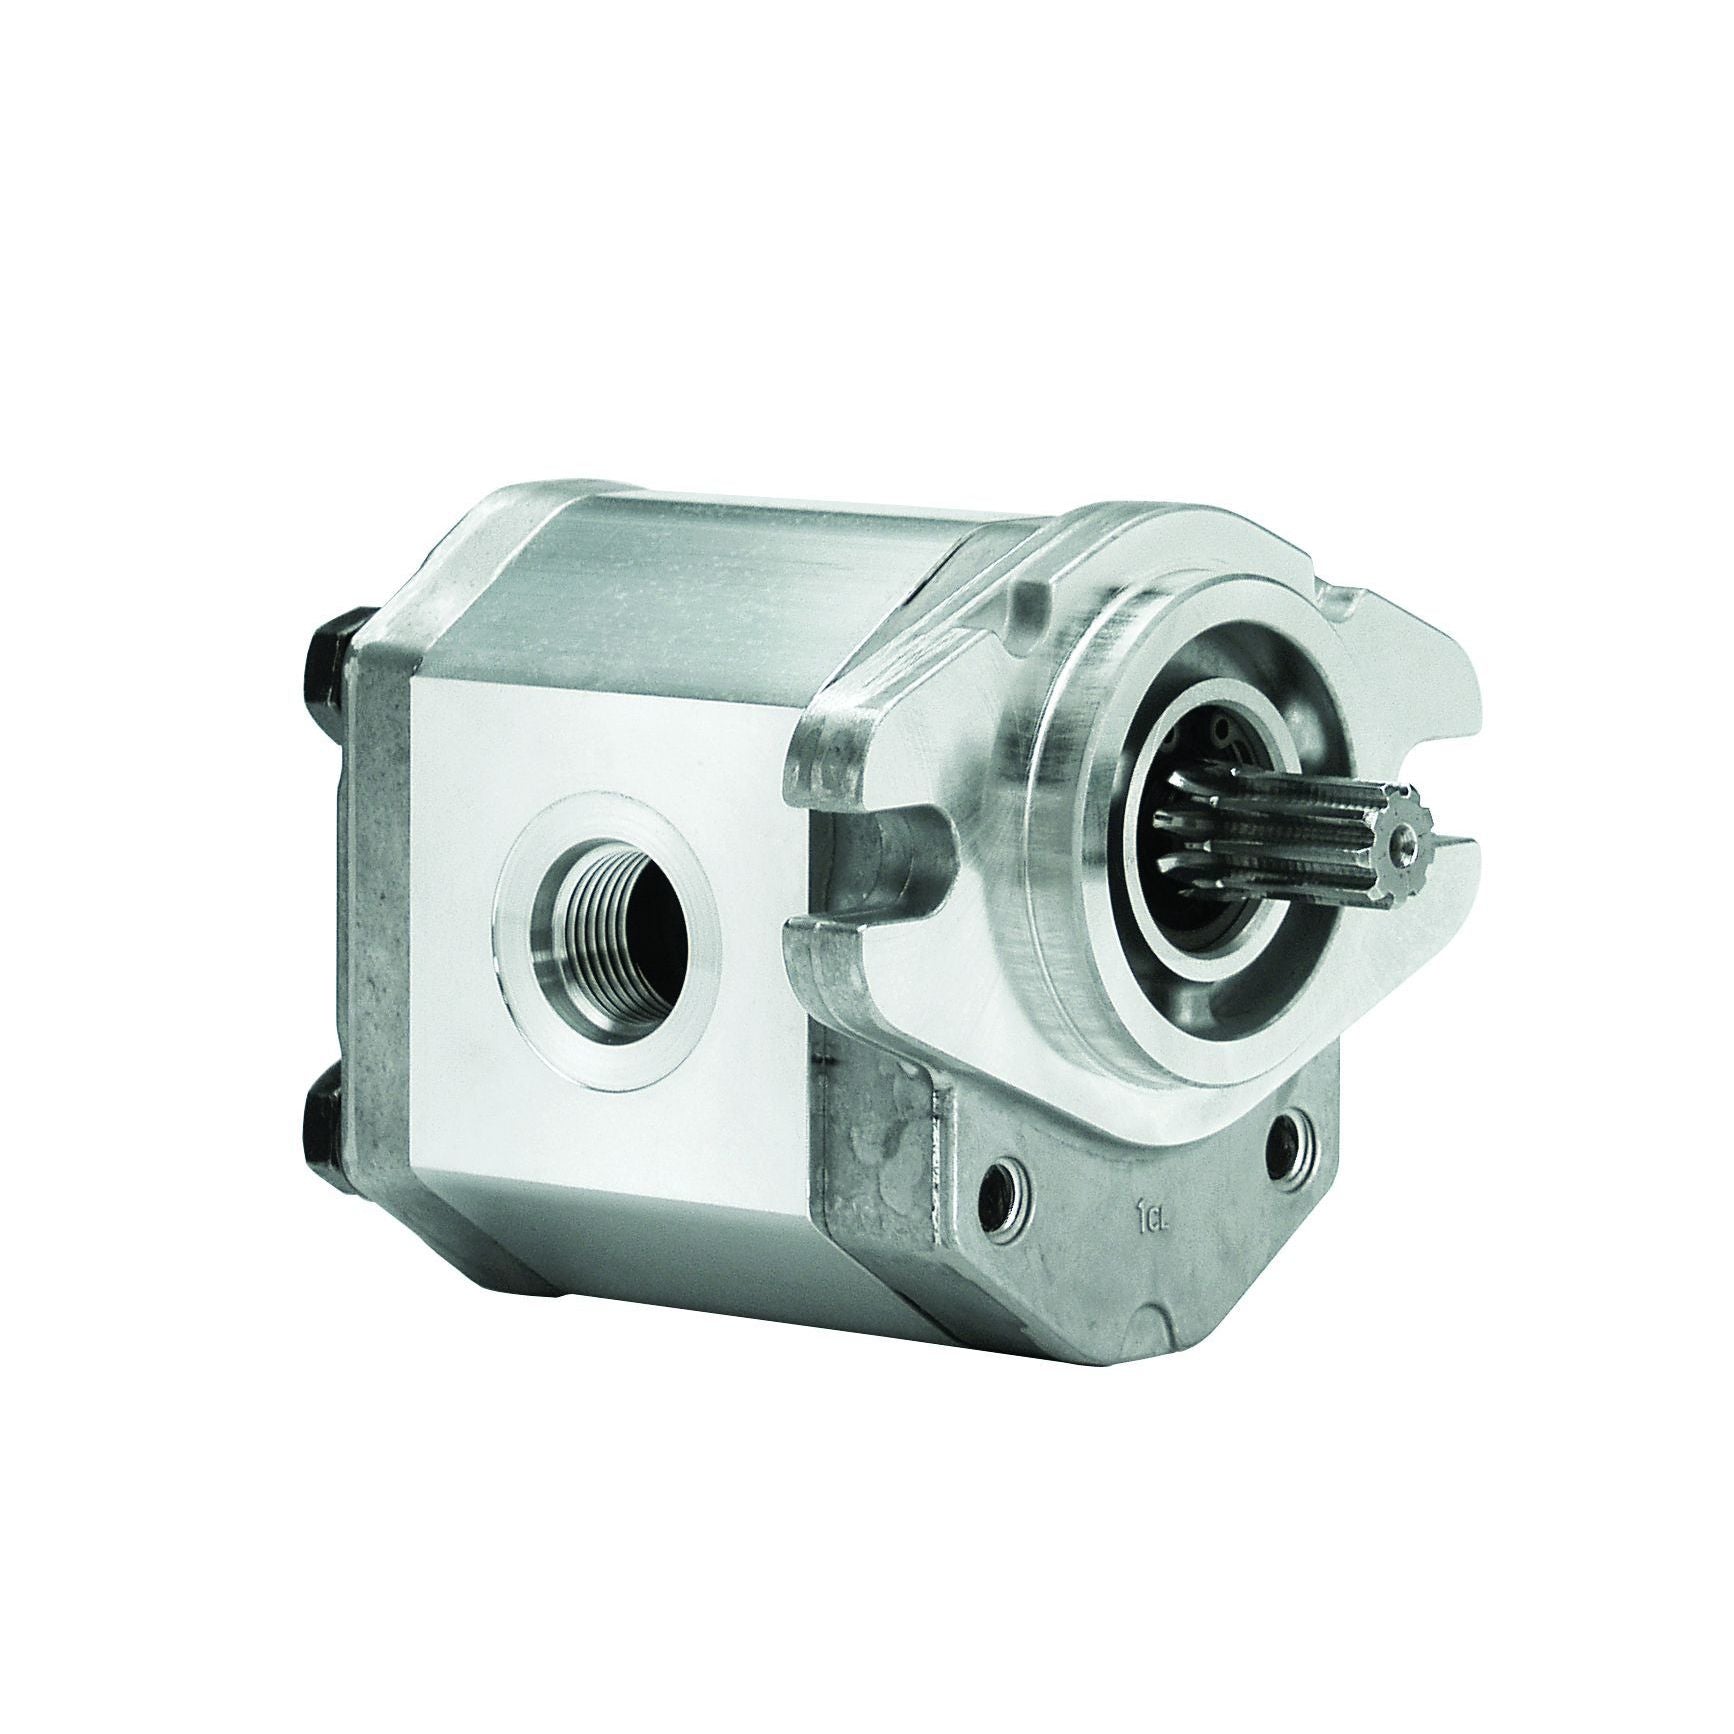 ALP1A-S-4-S1 : Marzocchi Gear Pump, CCW, 2.8cc (0.1708in3), 1.33 GPM, 3625psi, 5000 RPM, #8 SAE (1/2") In, #6 SAE (3/8") Out, Splined Shaft 9T 20/40DP, SAE AA 2-Bolt Mount